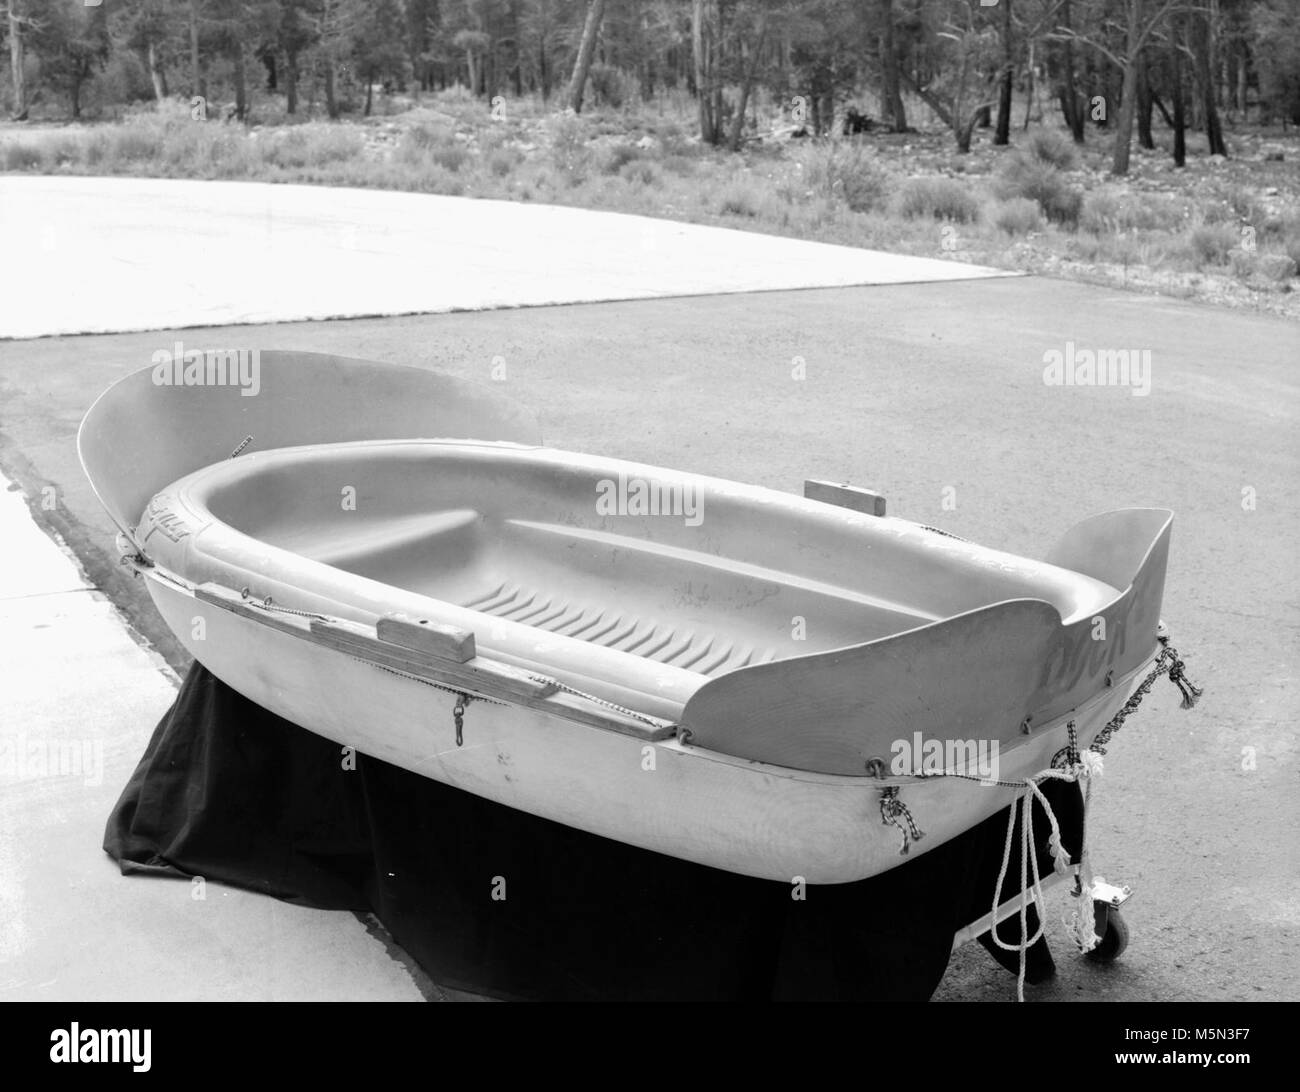 GRCA   Grand Canyon Historical Boat CollectionSportyak II (Dock) . Catalog # GRCA 9085  Object:  BOAT Description:   Sportyak named the 'Dock'.  The 'Dock' is a Sportyak II, made by Dayton Marine Products, Inc. and is vacuum formed of linear polyethelene. Length: 88 3/8 inches;  Beam: 44 1/2 inches;  Height of bow: 21 1/4 inches;  Height of transom 16 inches;  Height of midship 14+ inches: Weight: 38 pounds This boat was used by Otis ’Dock’ Marston for a com Stock Photo